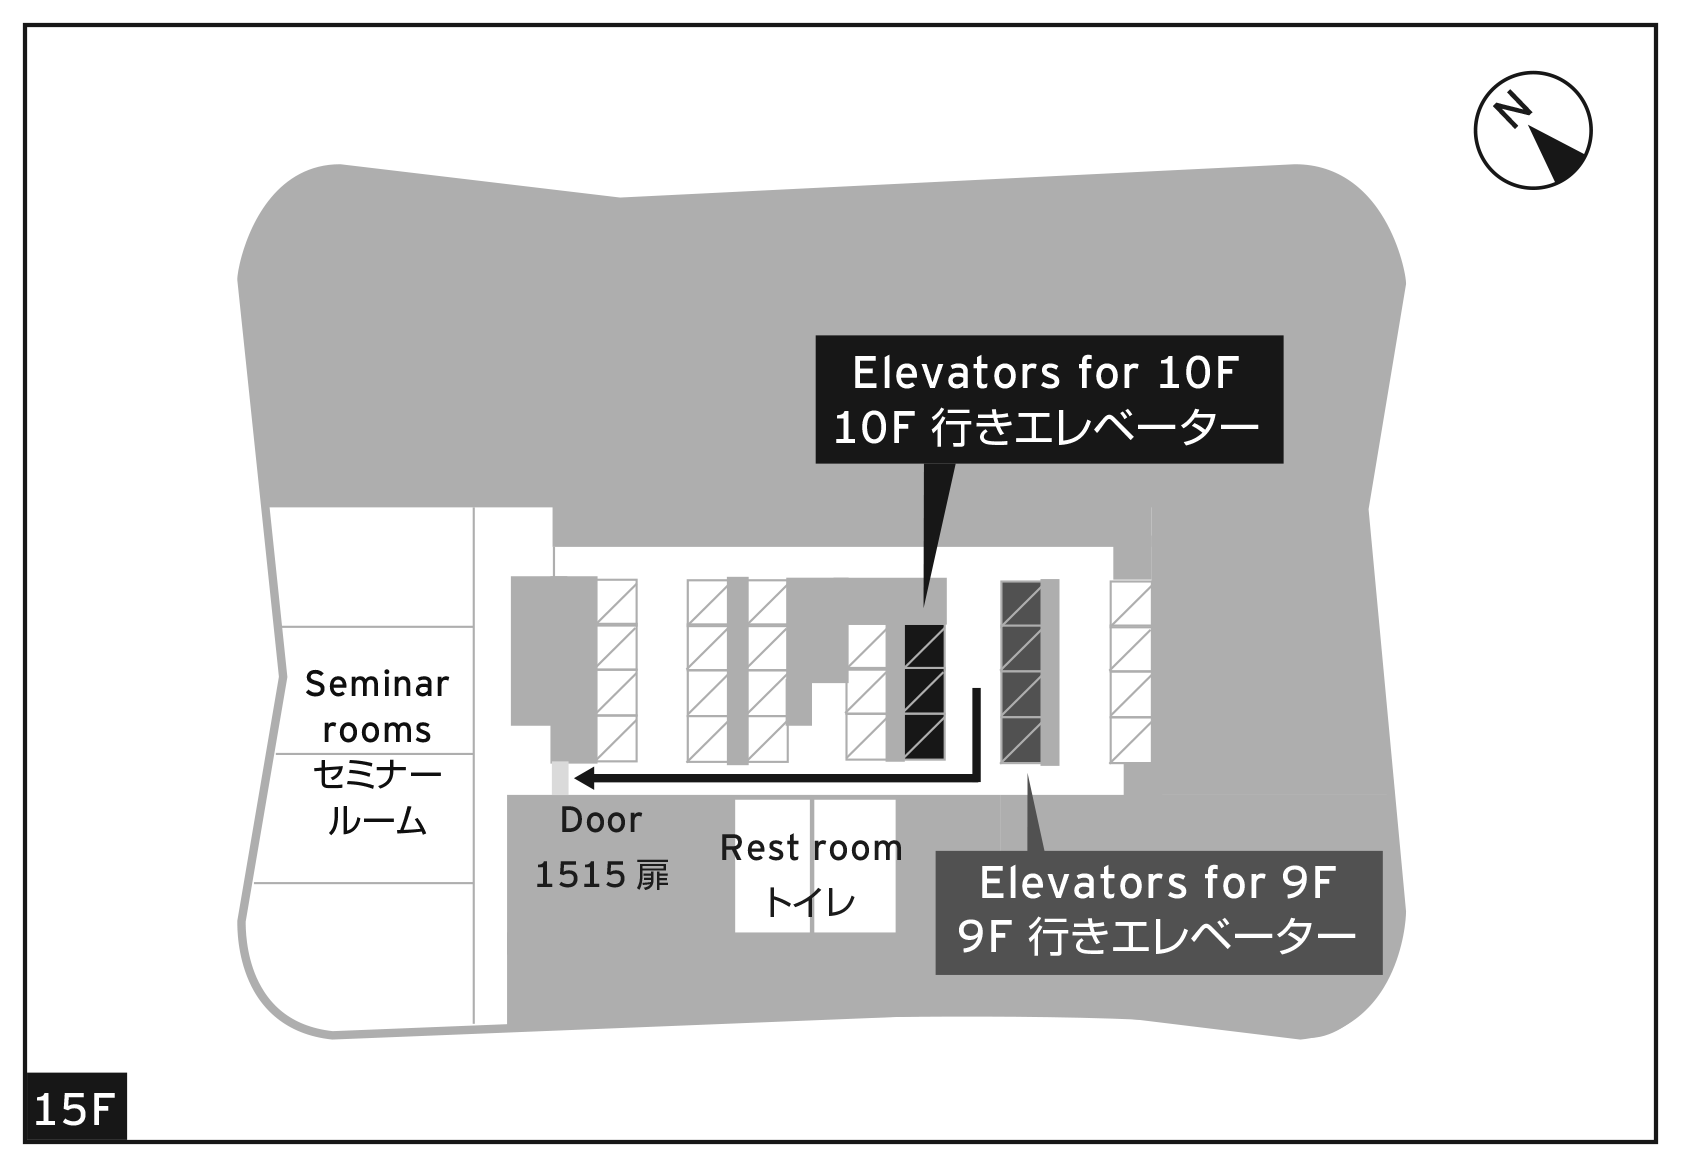 Available Elevators